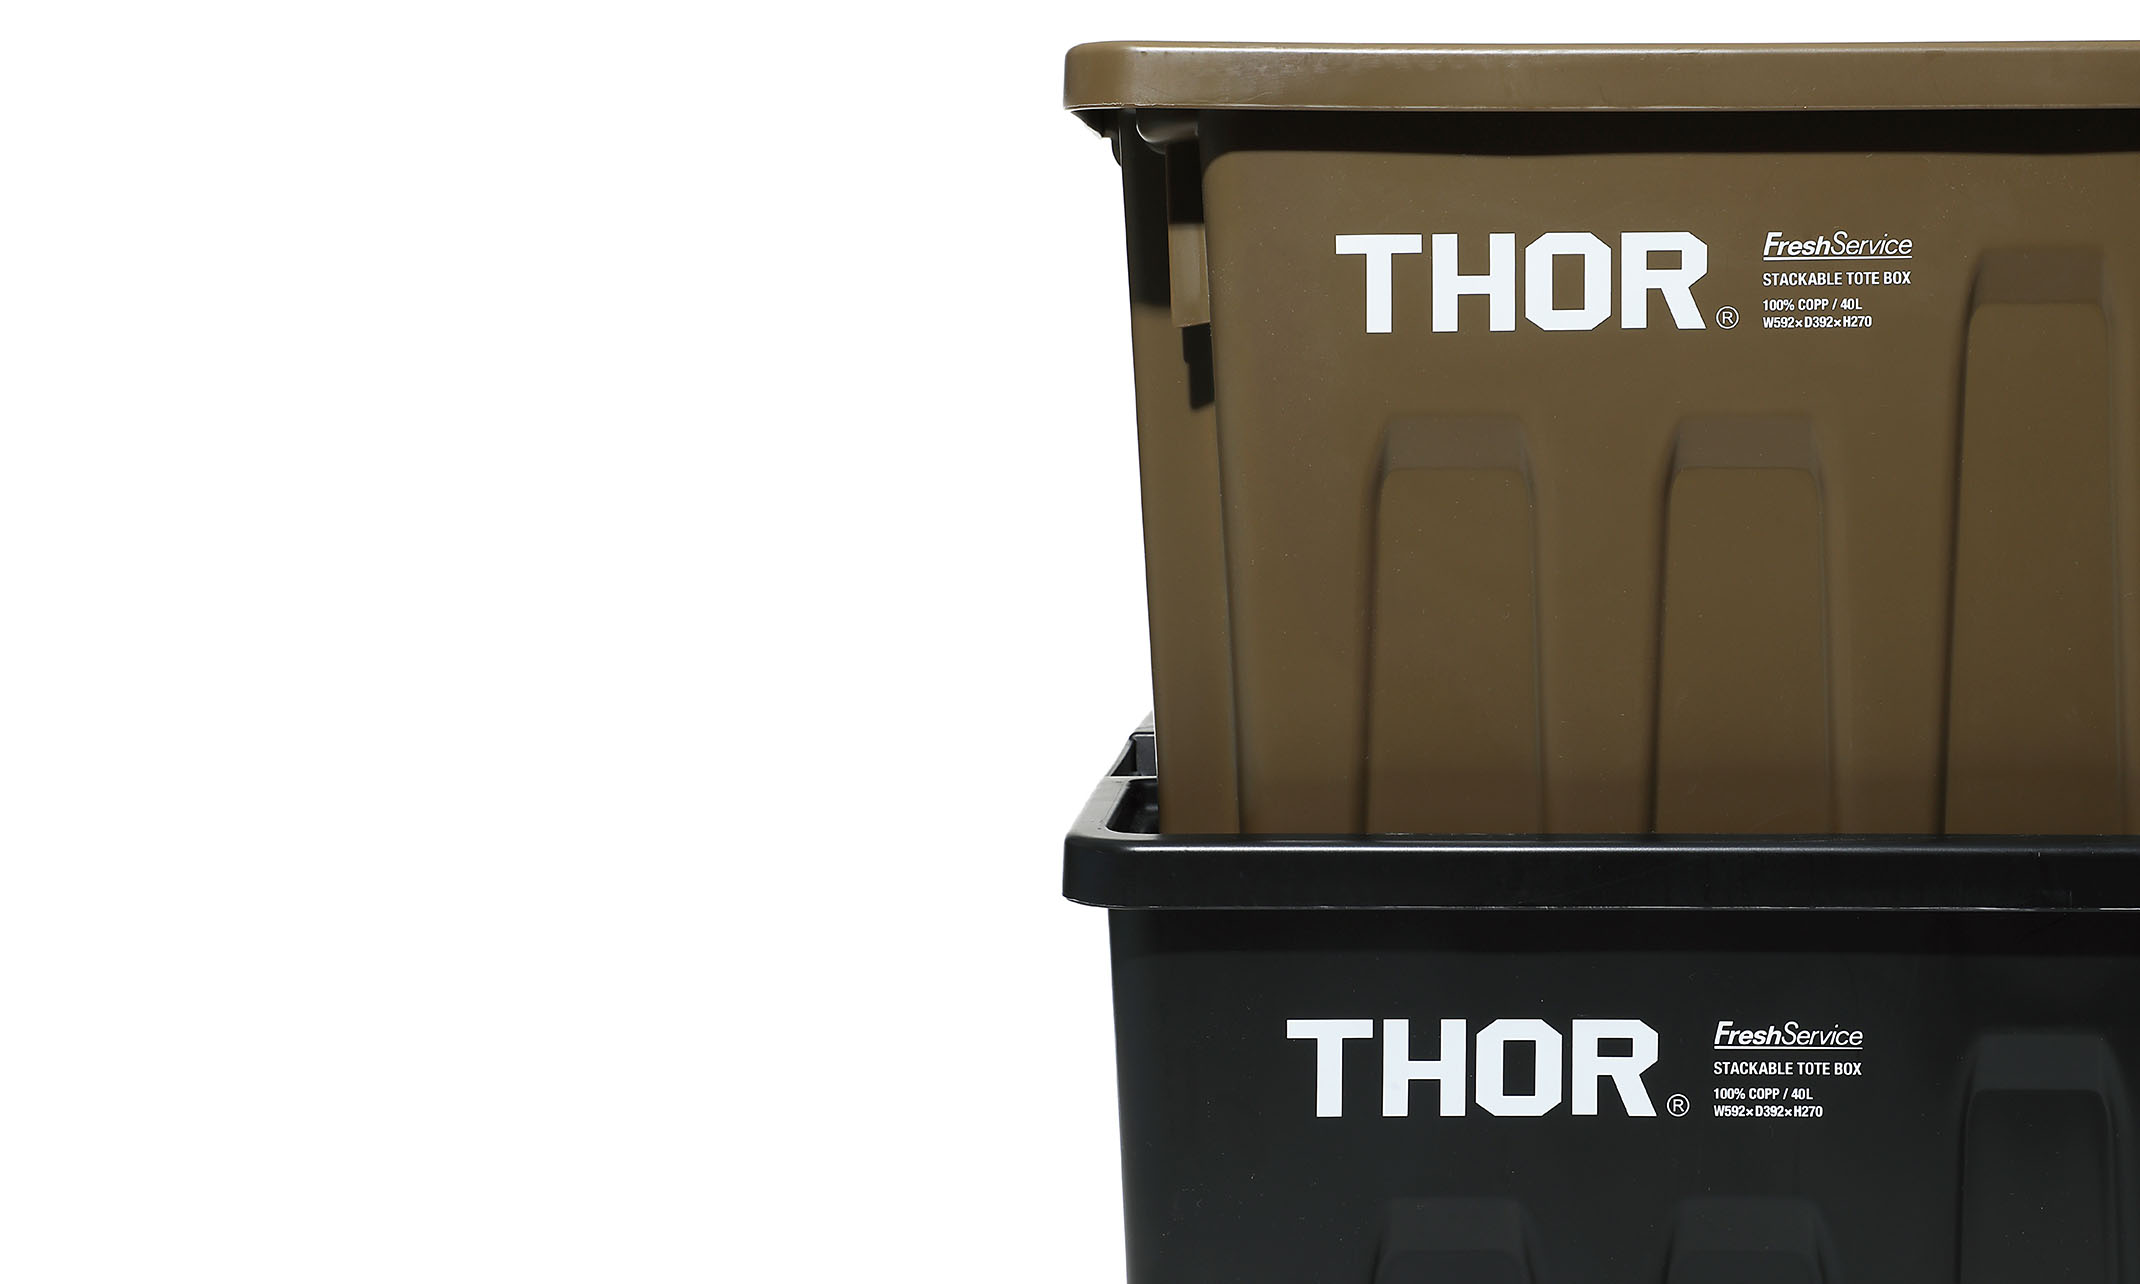 THOR® x Fresh Service 推出「STACKABLE TOTE BOX」